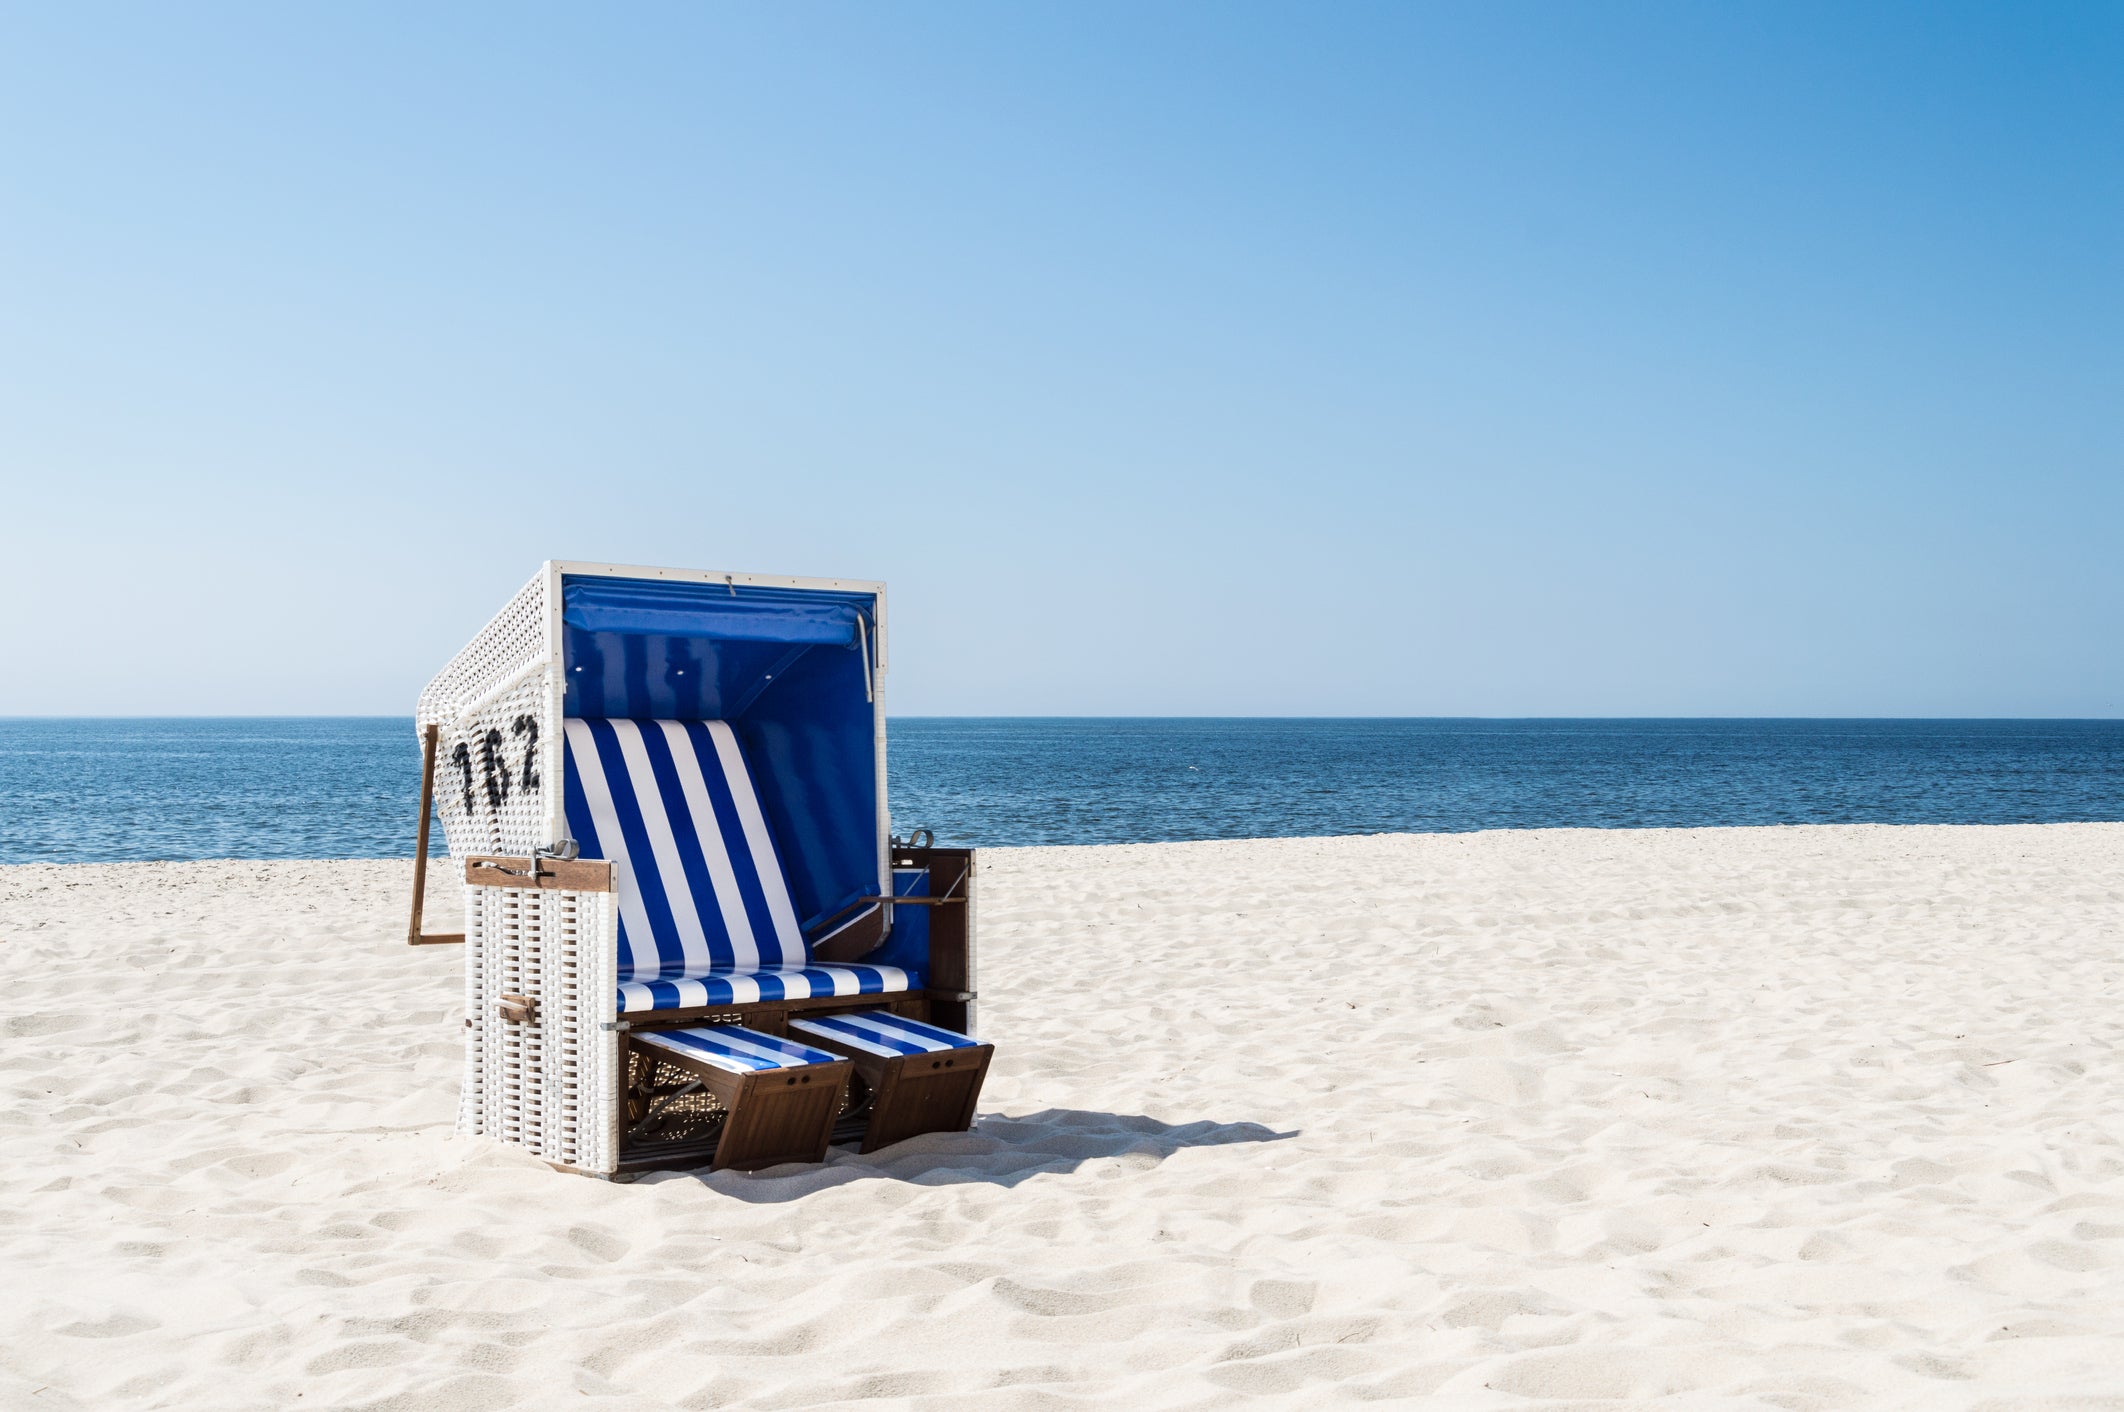 The North Frisian Islands’ microclimate and pale sands are popular with German travellers in the know